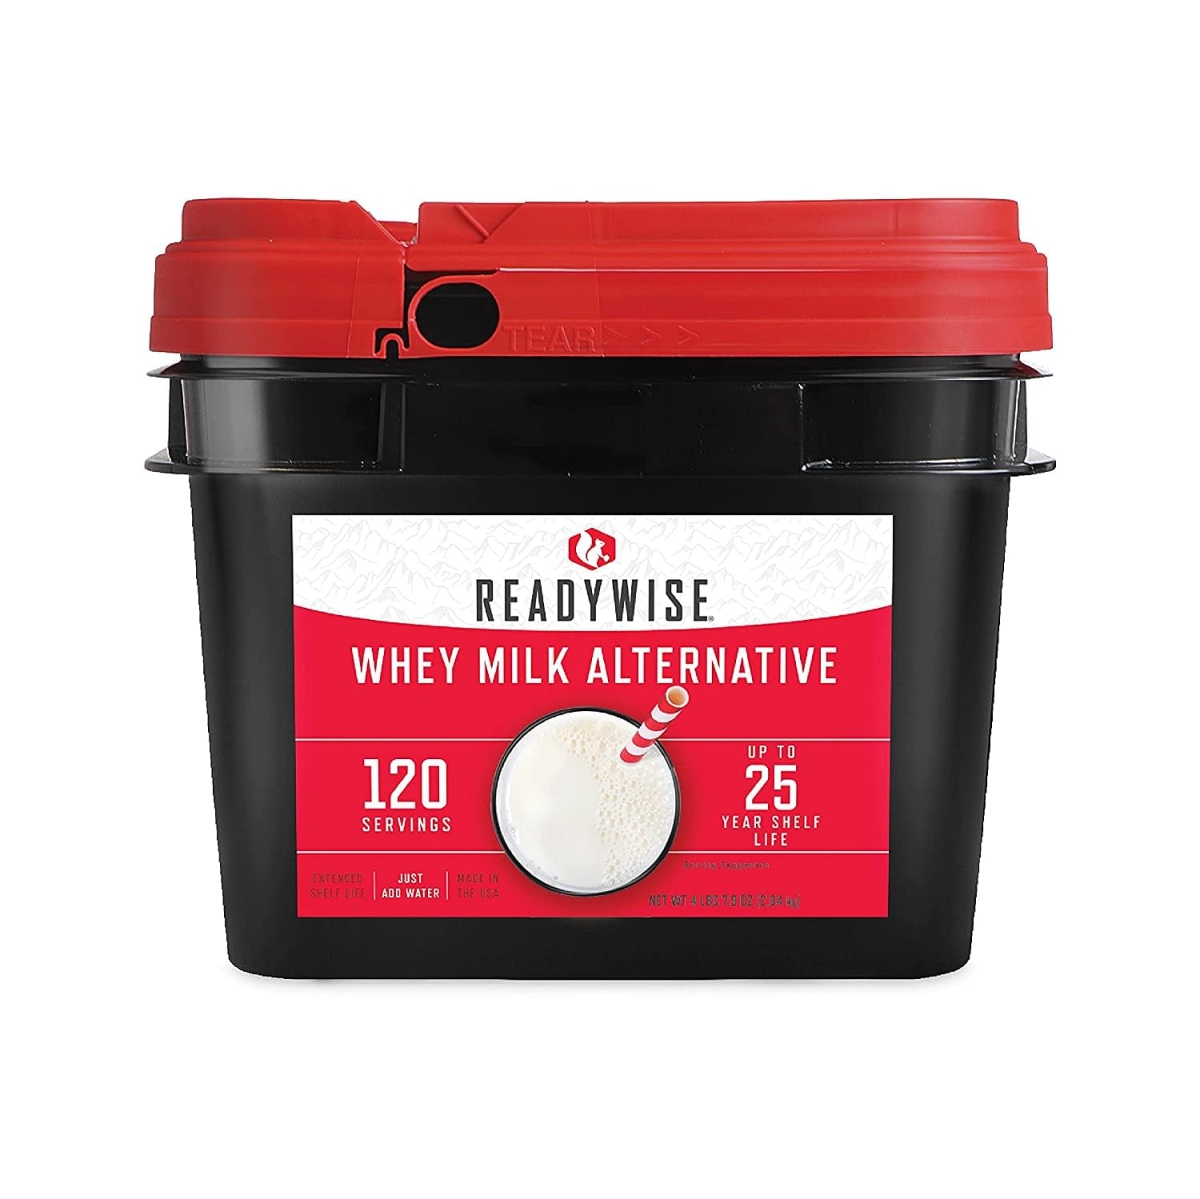 Picture of Readywise 695024 720 Serving Emergency Survival Whey Milk Camping Food Buckets